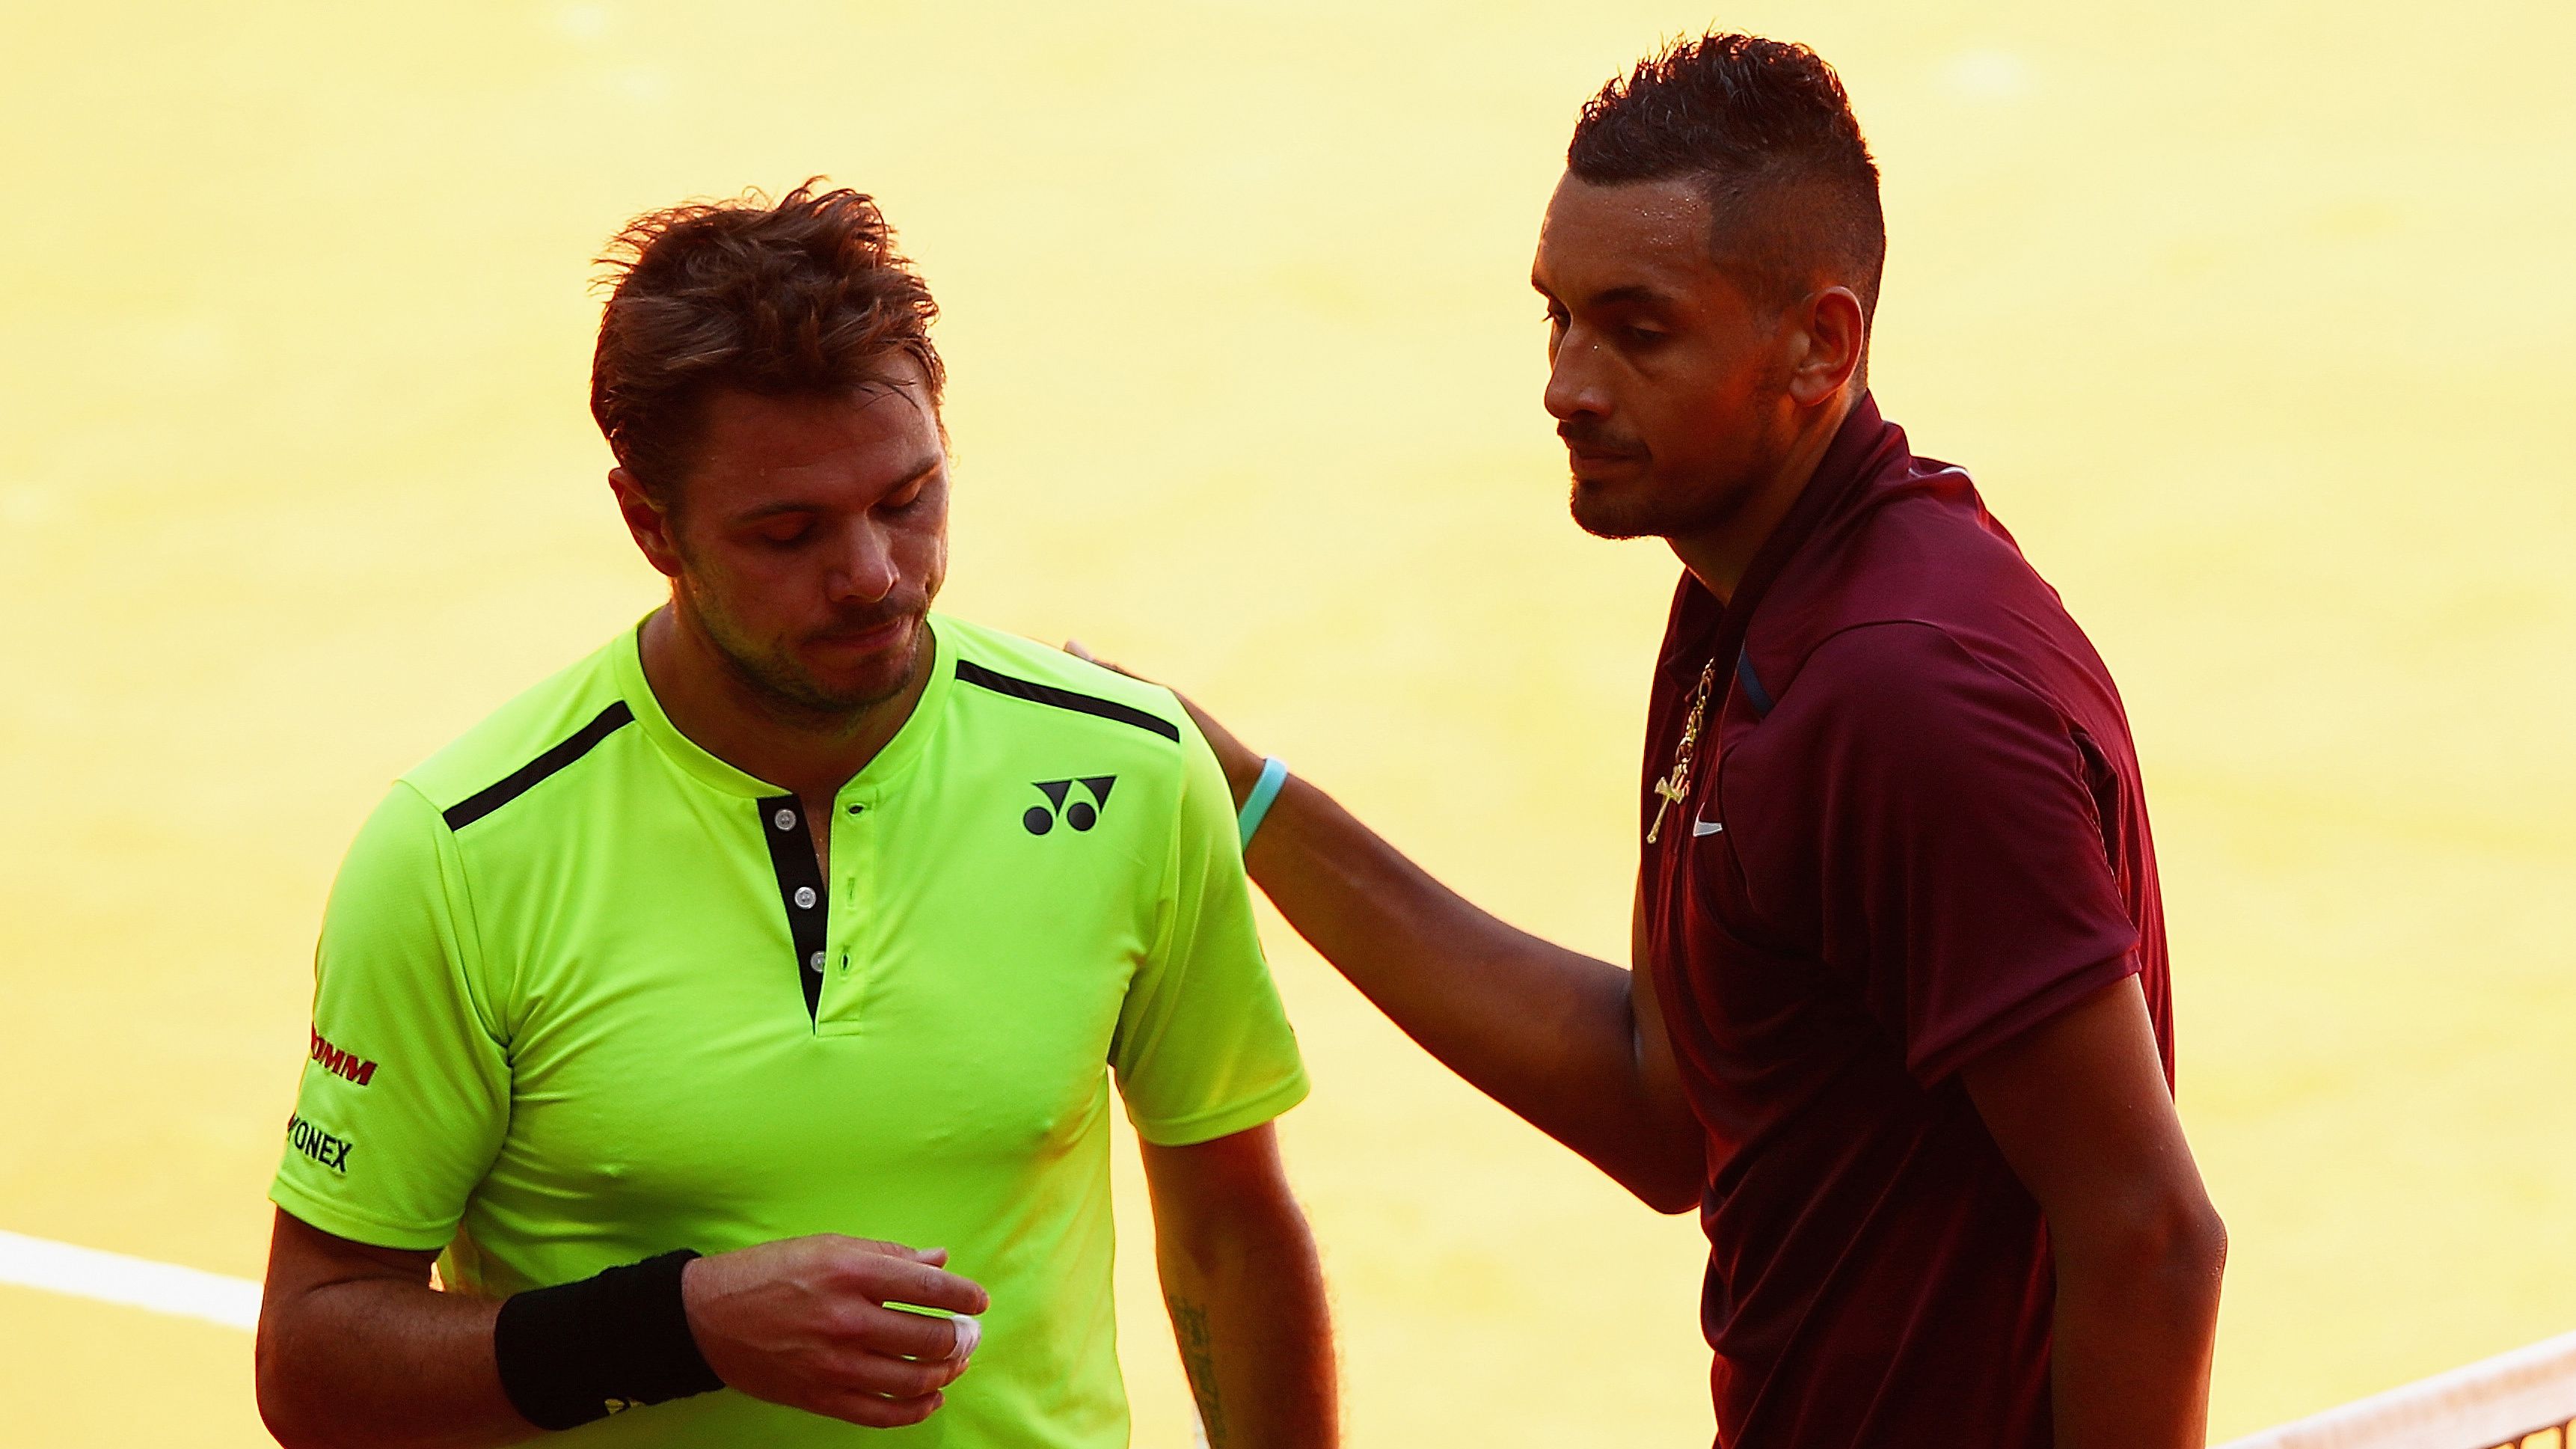 Nick Kyrgios and Stan Wawrinka at the Madrid Open in 2016.